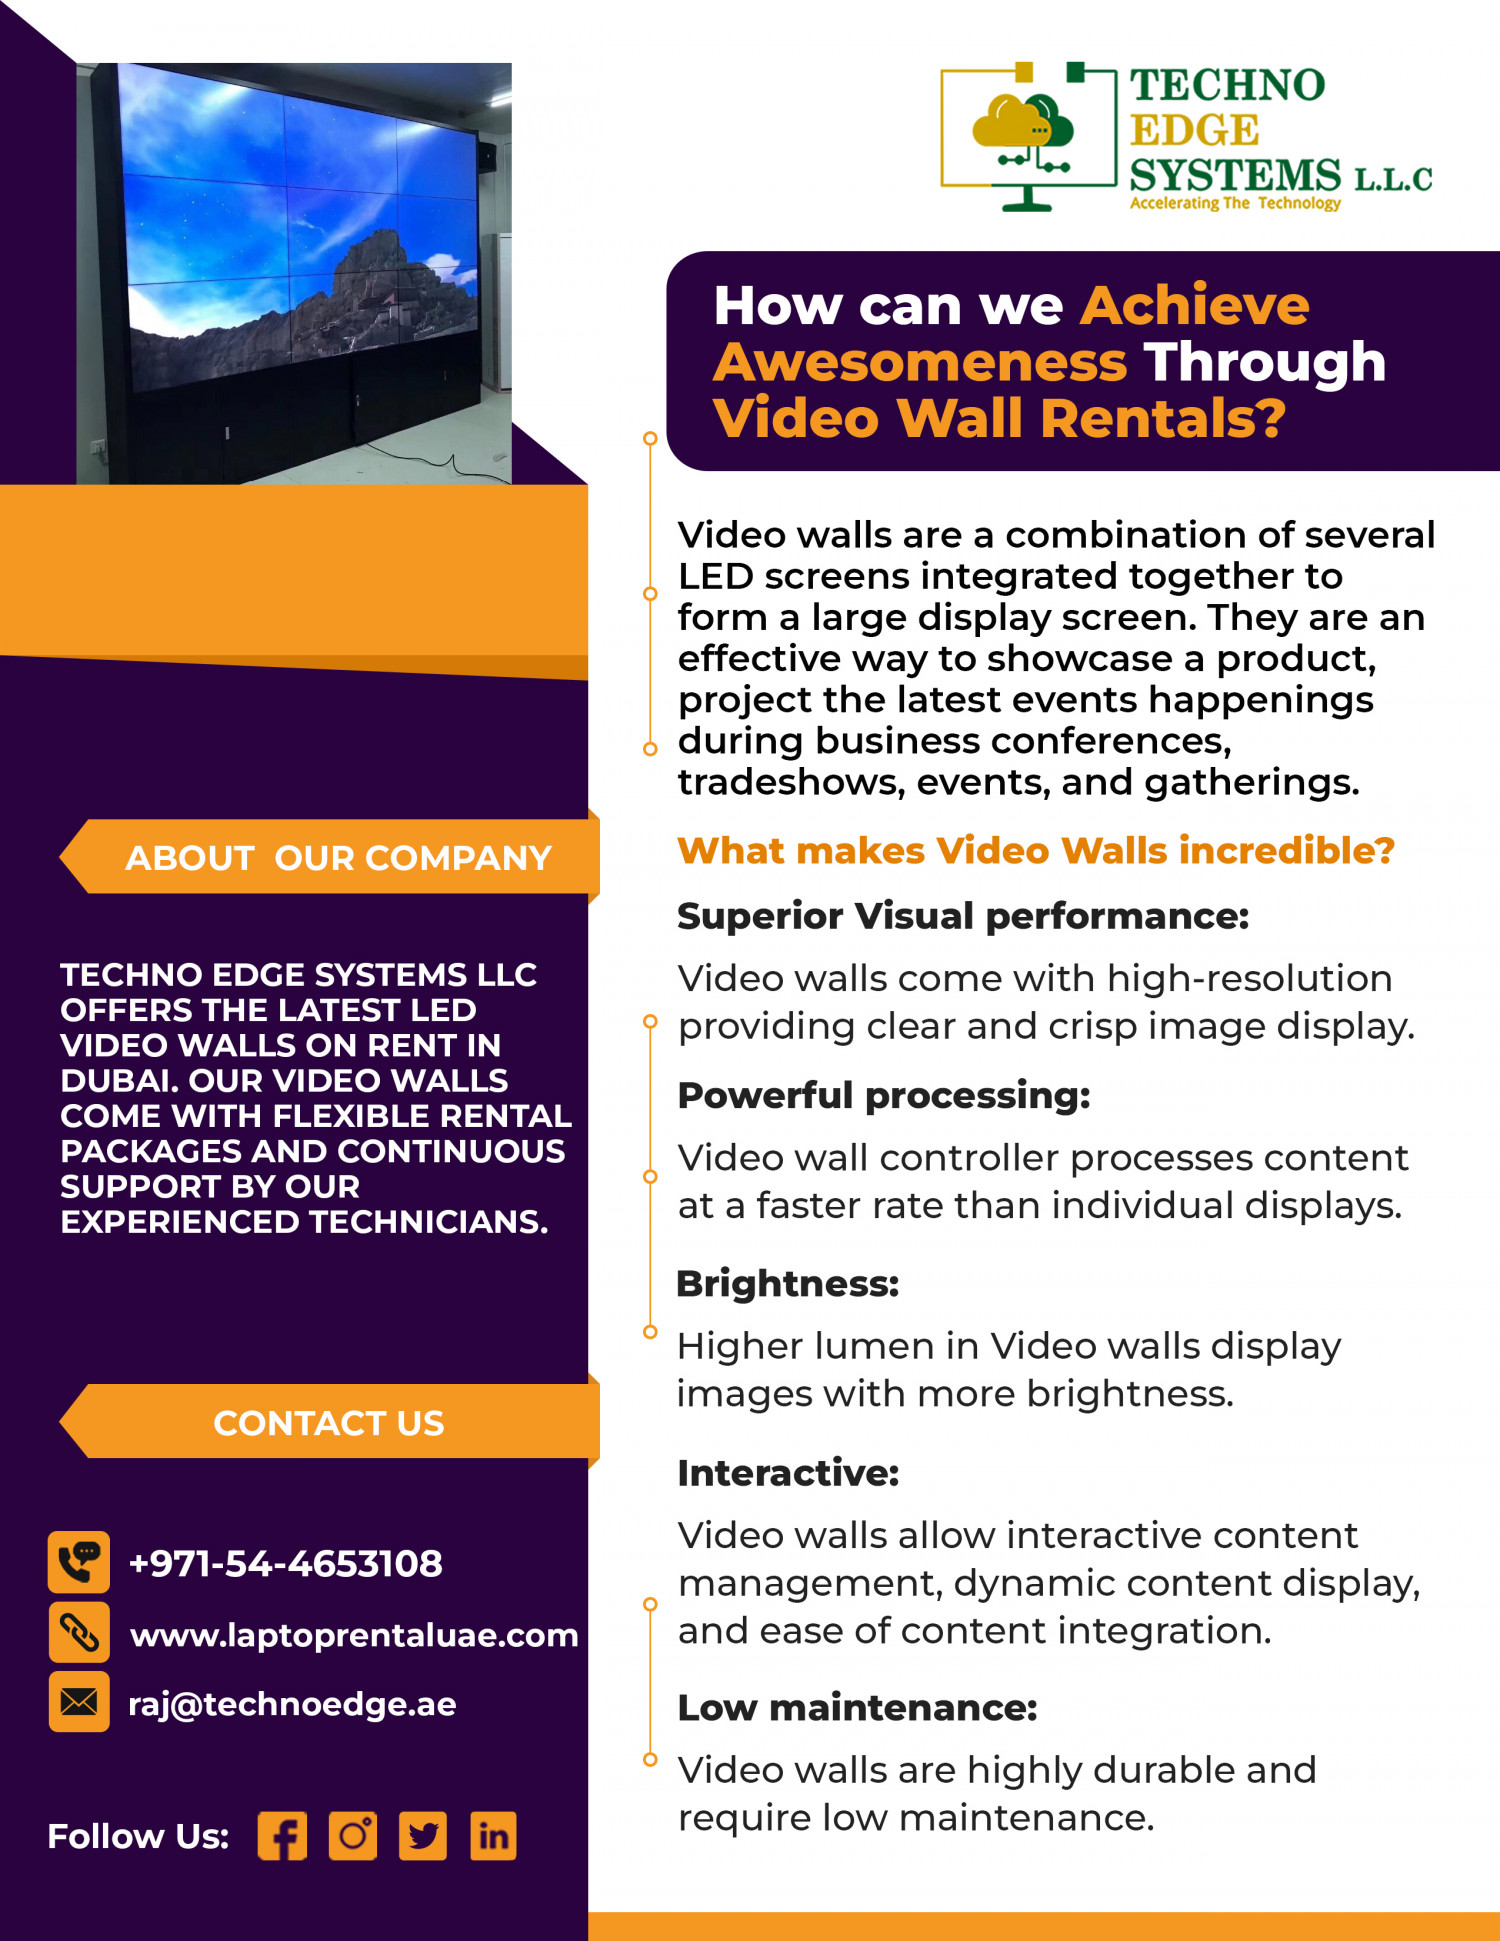 How Can We Achieve Awesomeness Through Video Wall Rentals in Dubai? Infographic